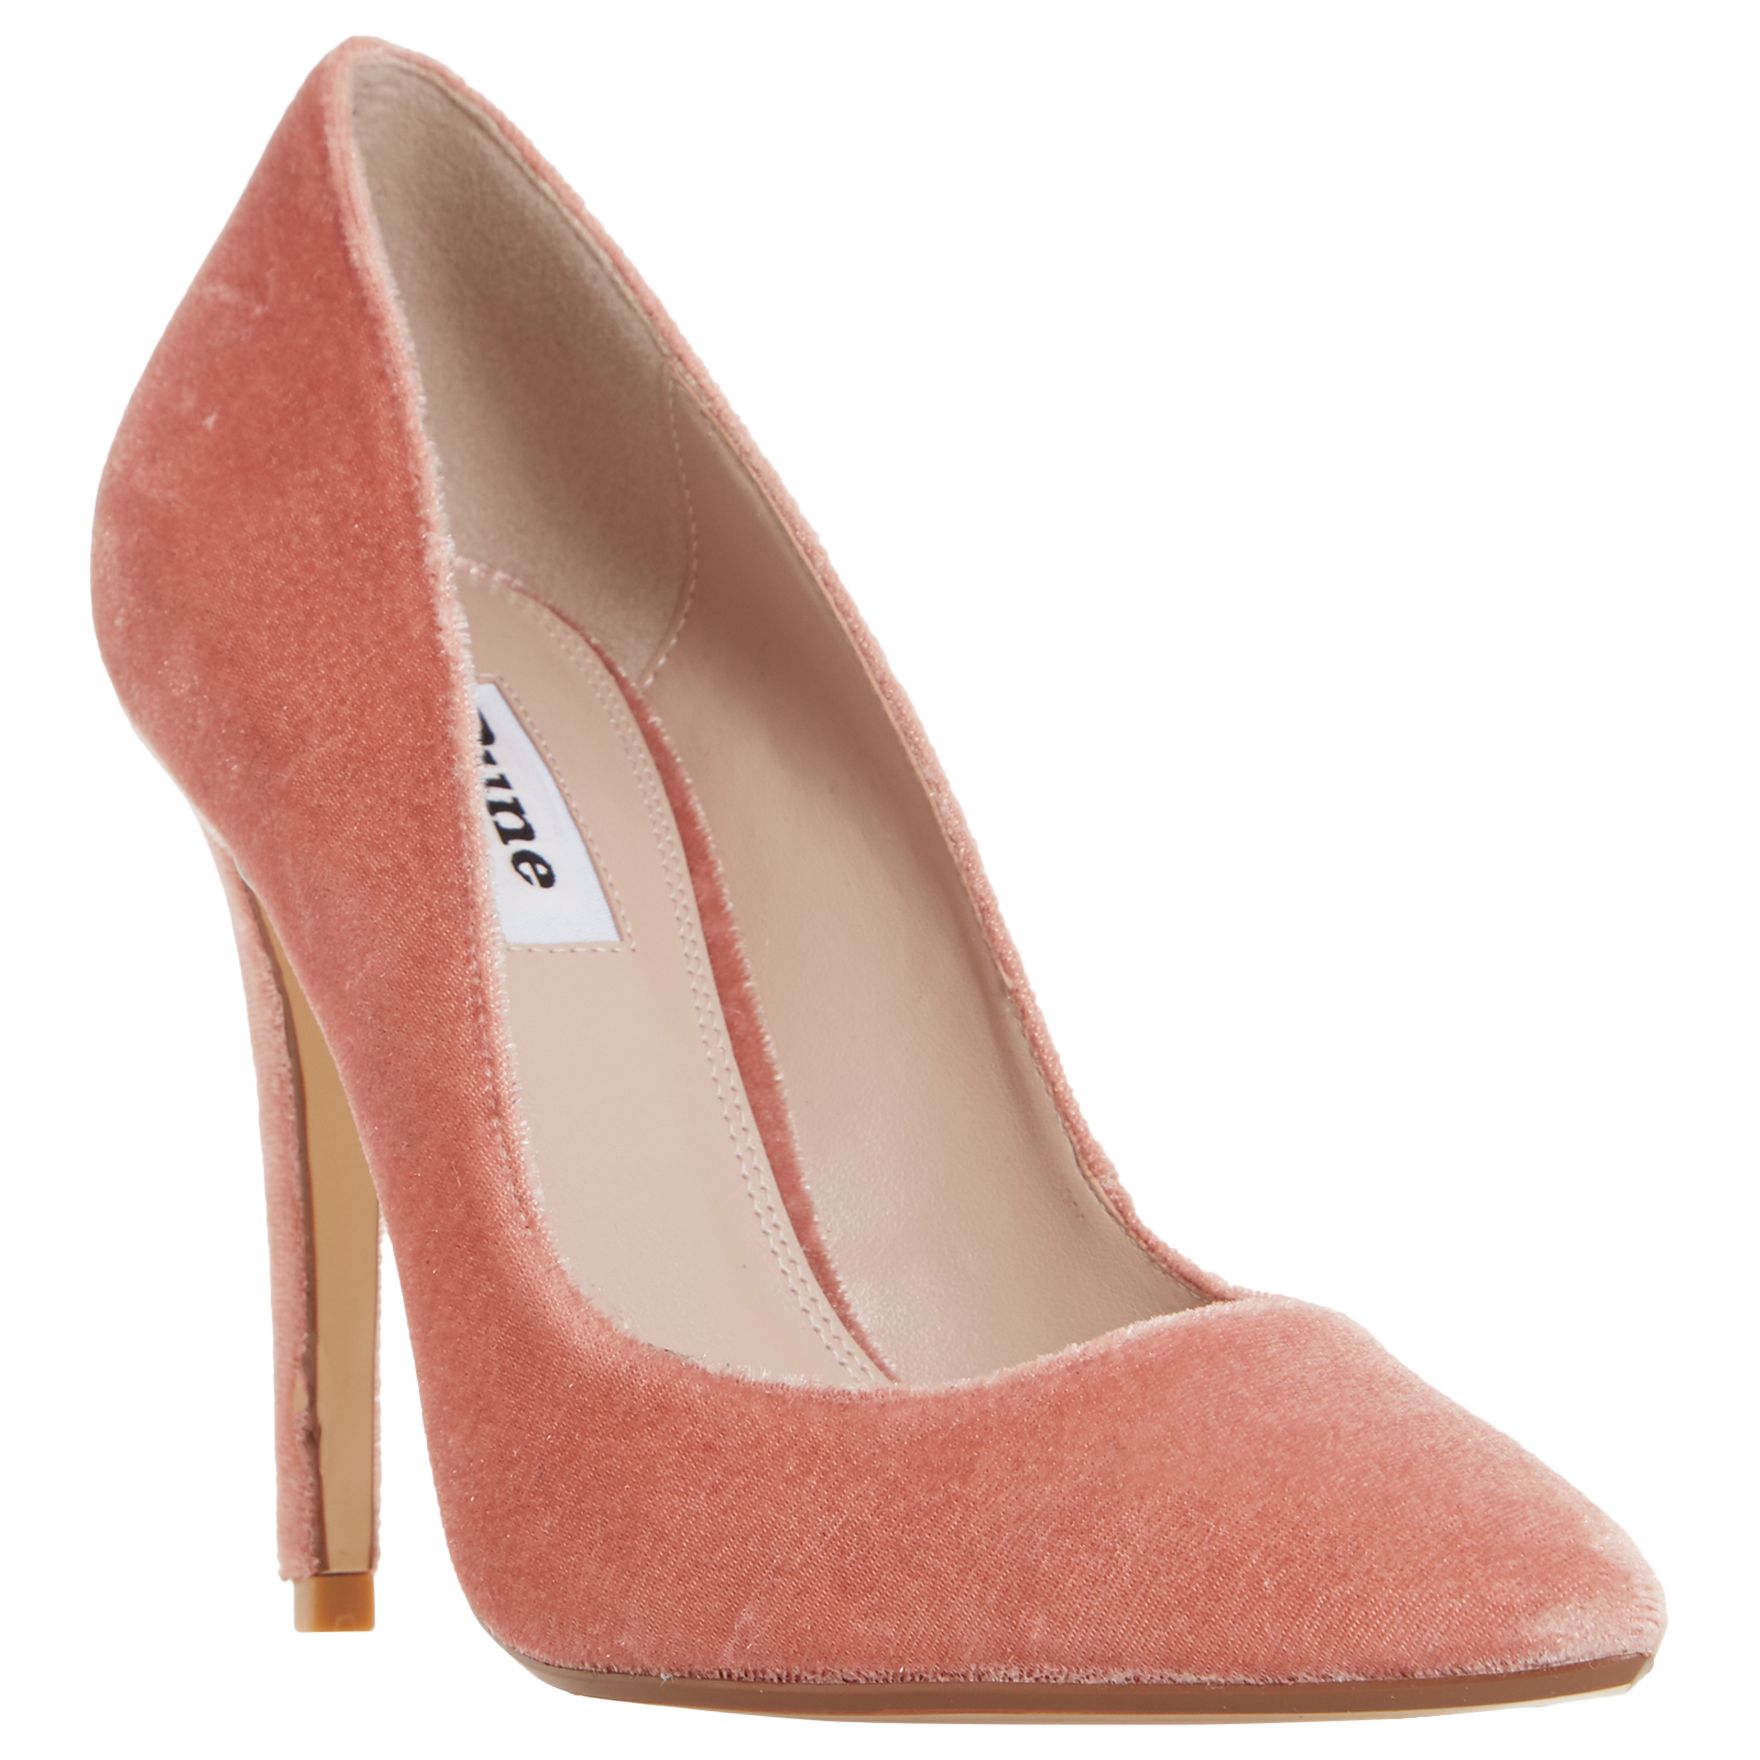 Dune Aiyana Pointed Toe Court Shoes, Blush, 4